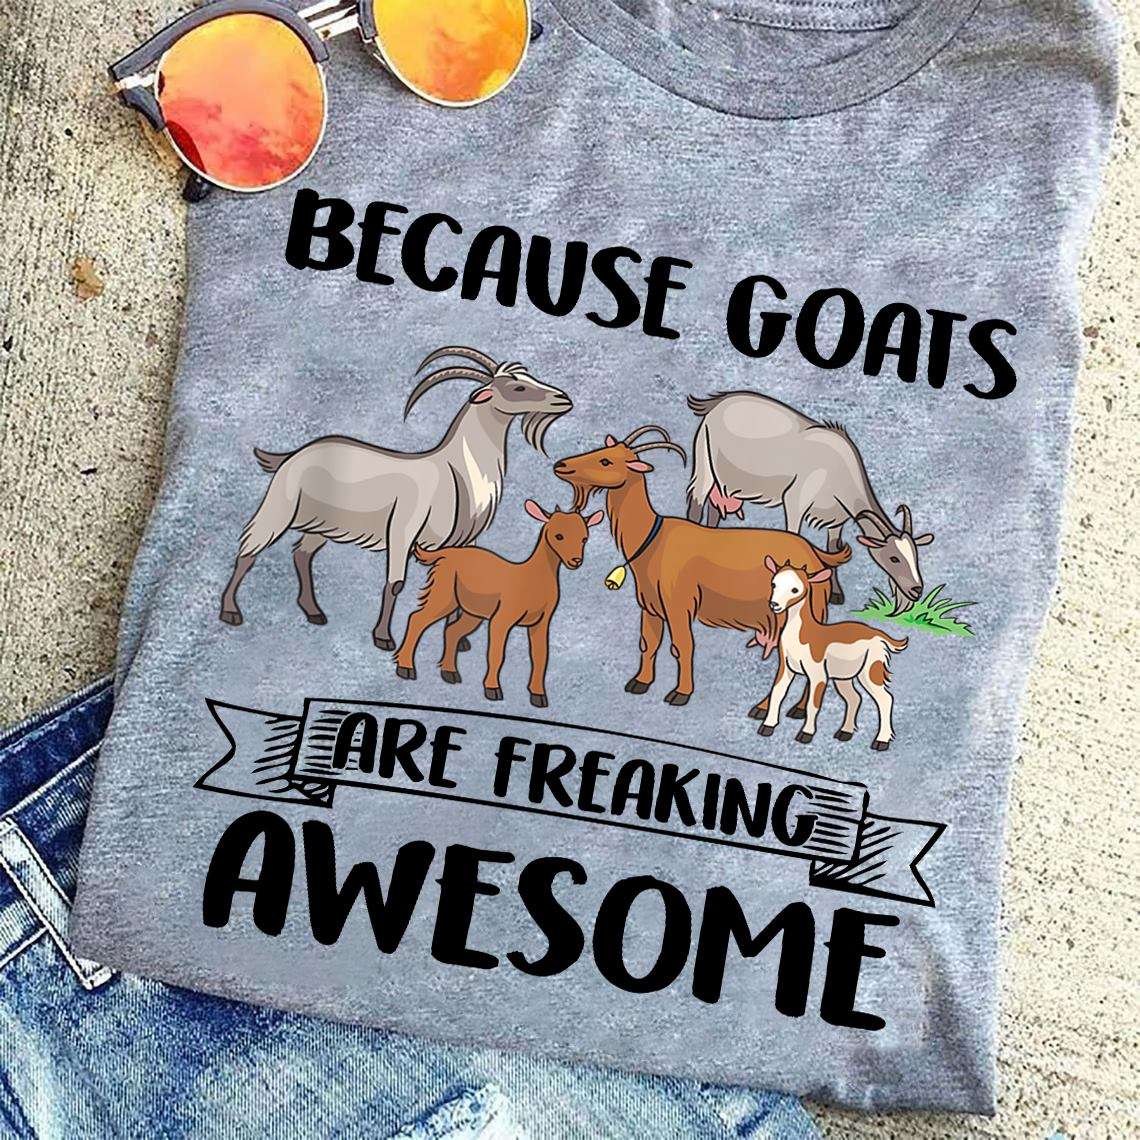 Love Goats - Because goats are freaking awesome